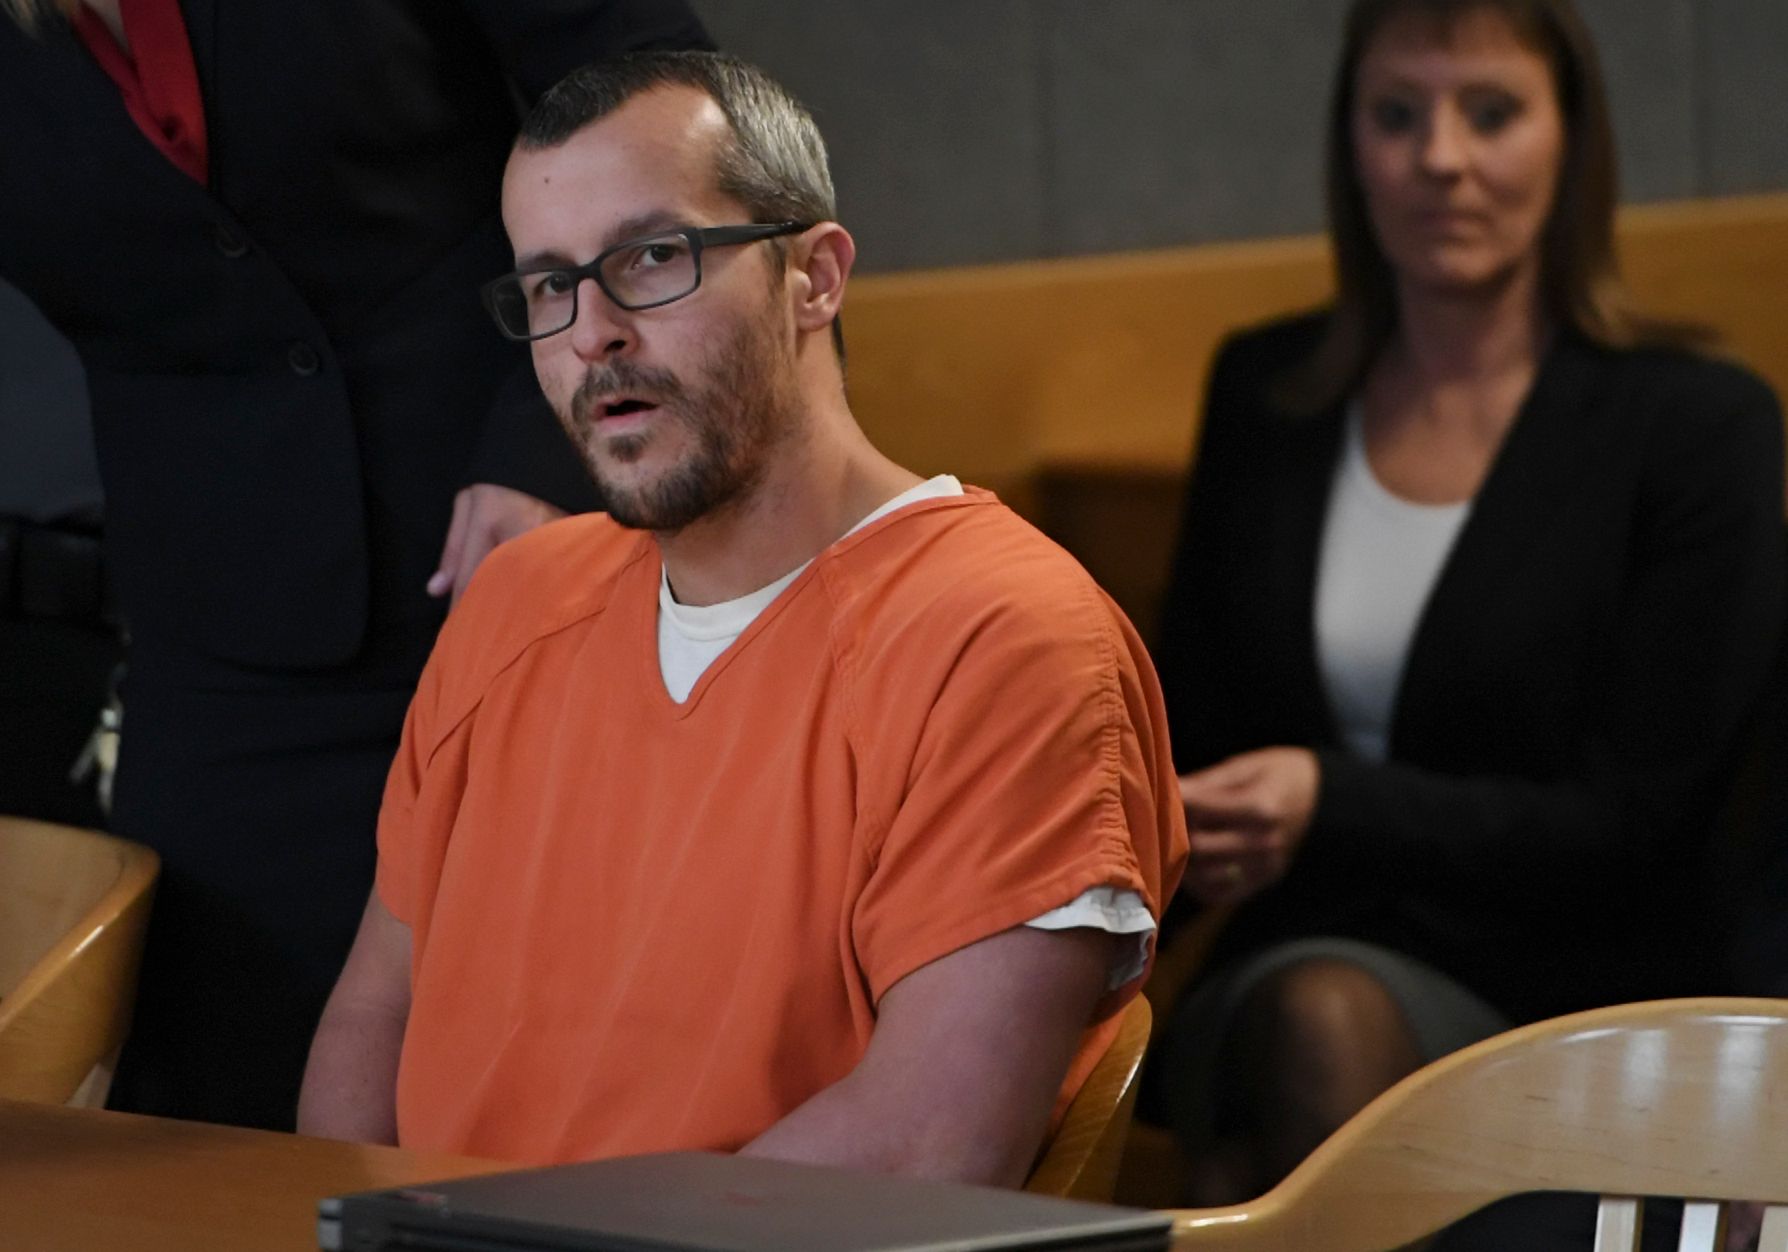 Christopher Watts sat in court for his sentencing hearing at the Weld County Courthouse on November 19, 2018 in Greeley, Colorado | Photo: Getty Images